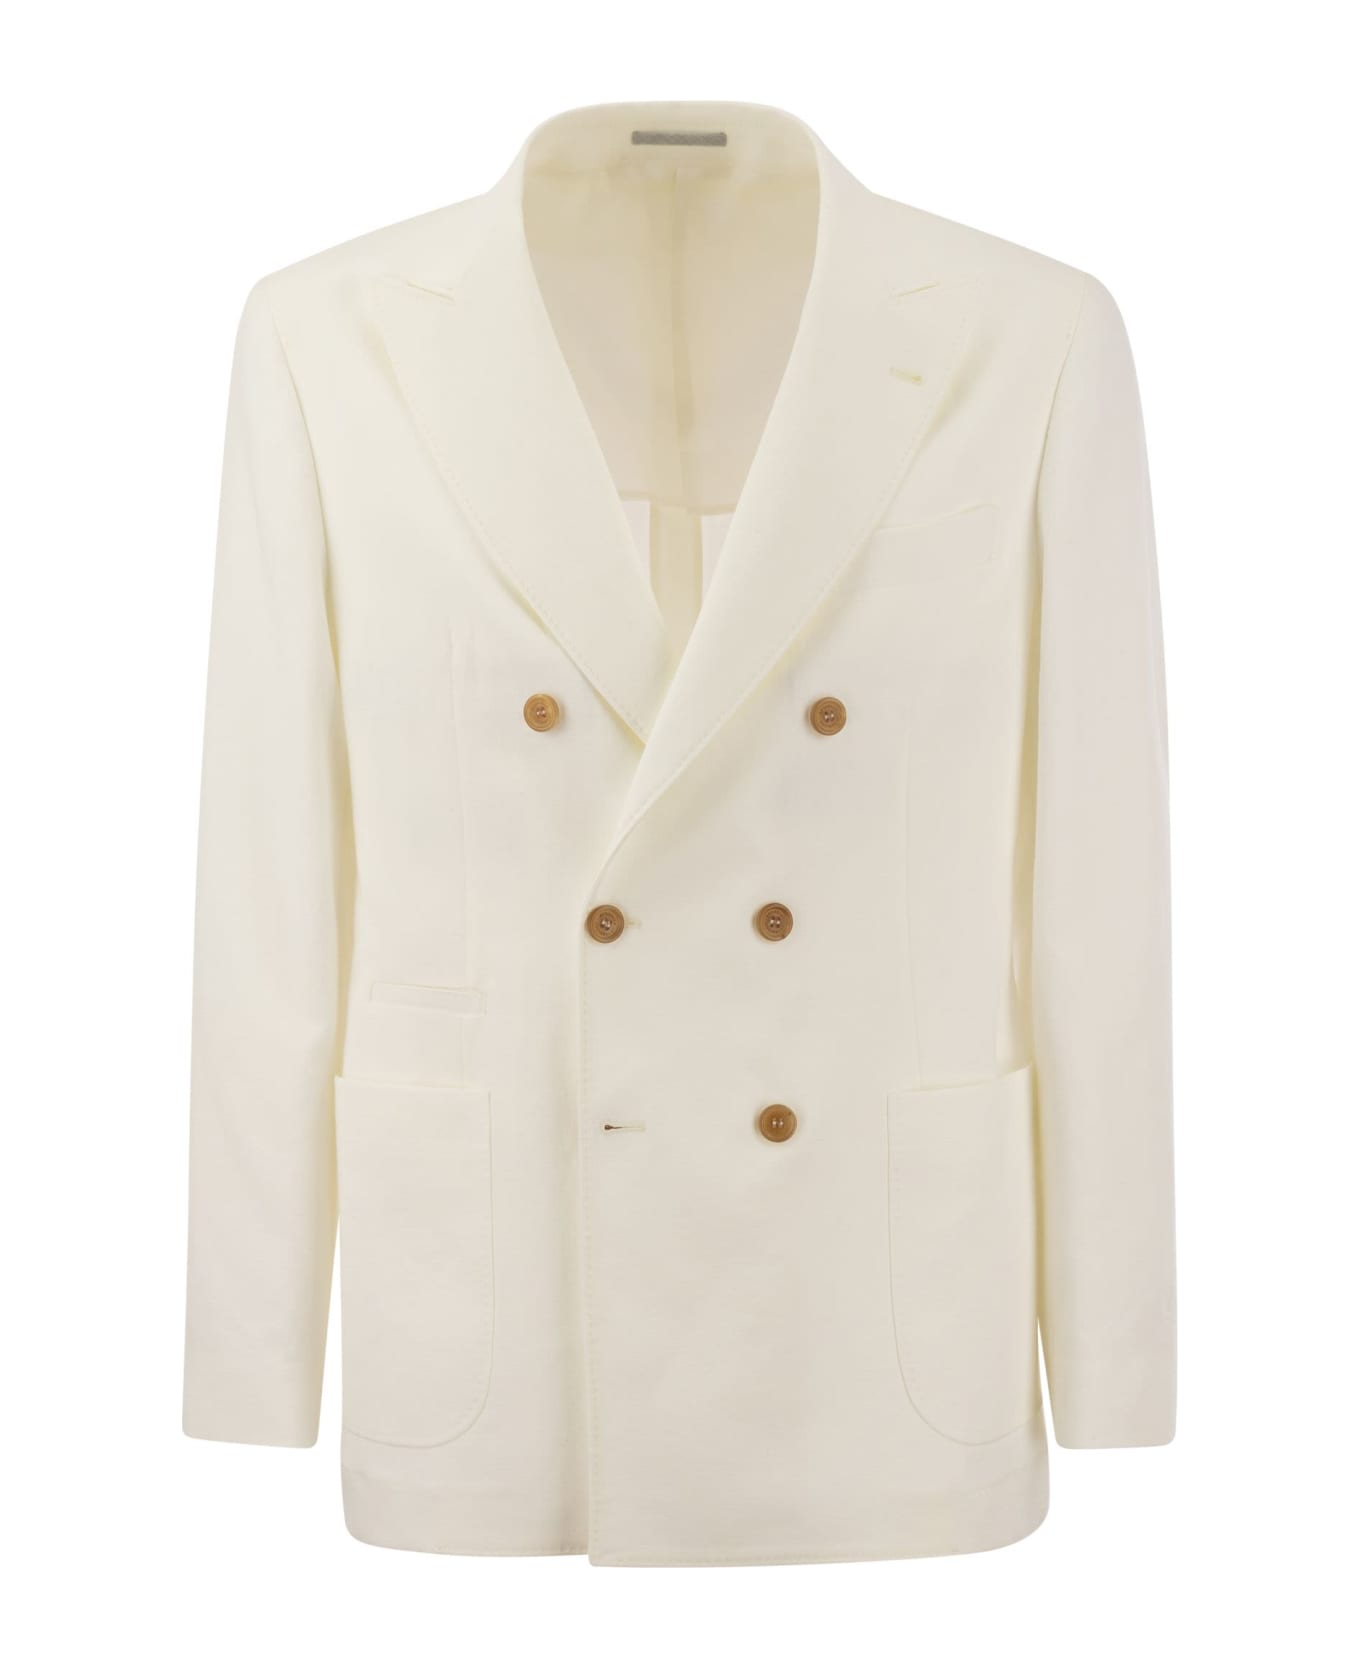 Brunello Cucinelli Twisted Linen Deconstructed Jacket With Patch Pockets - White